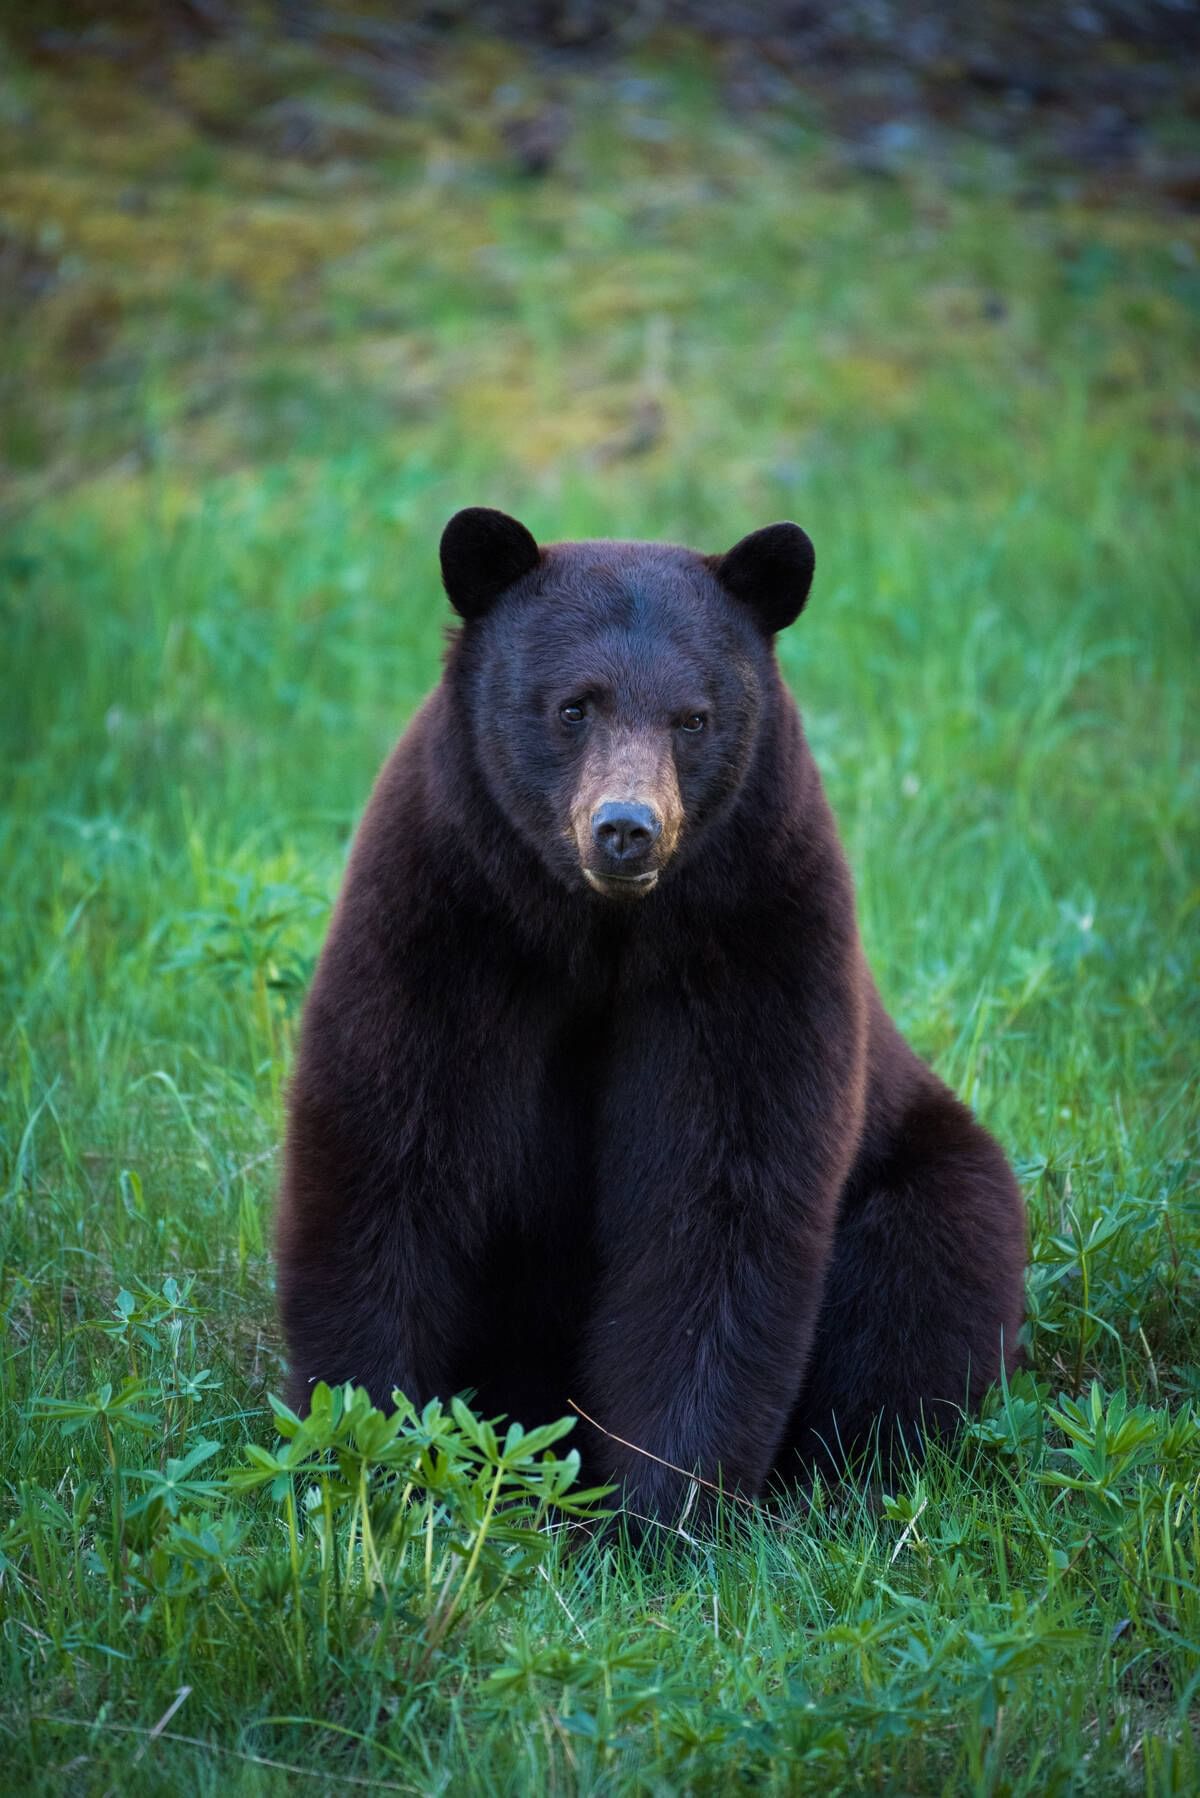 Close-up of a Black bear eating grass near Blackcomb Springs Suites